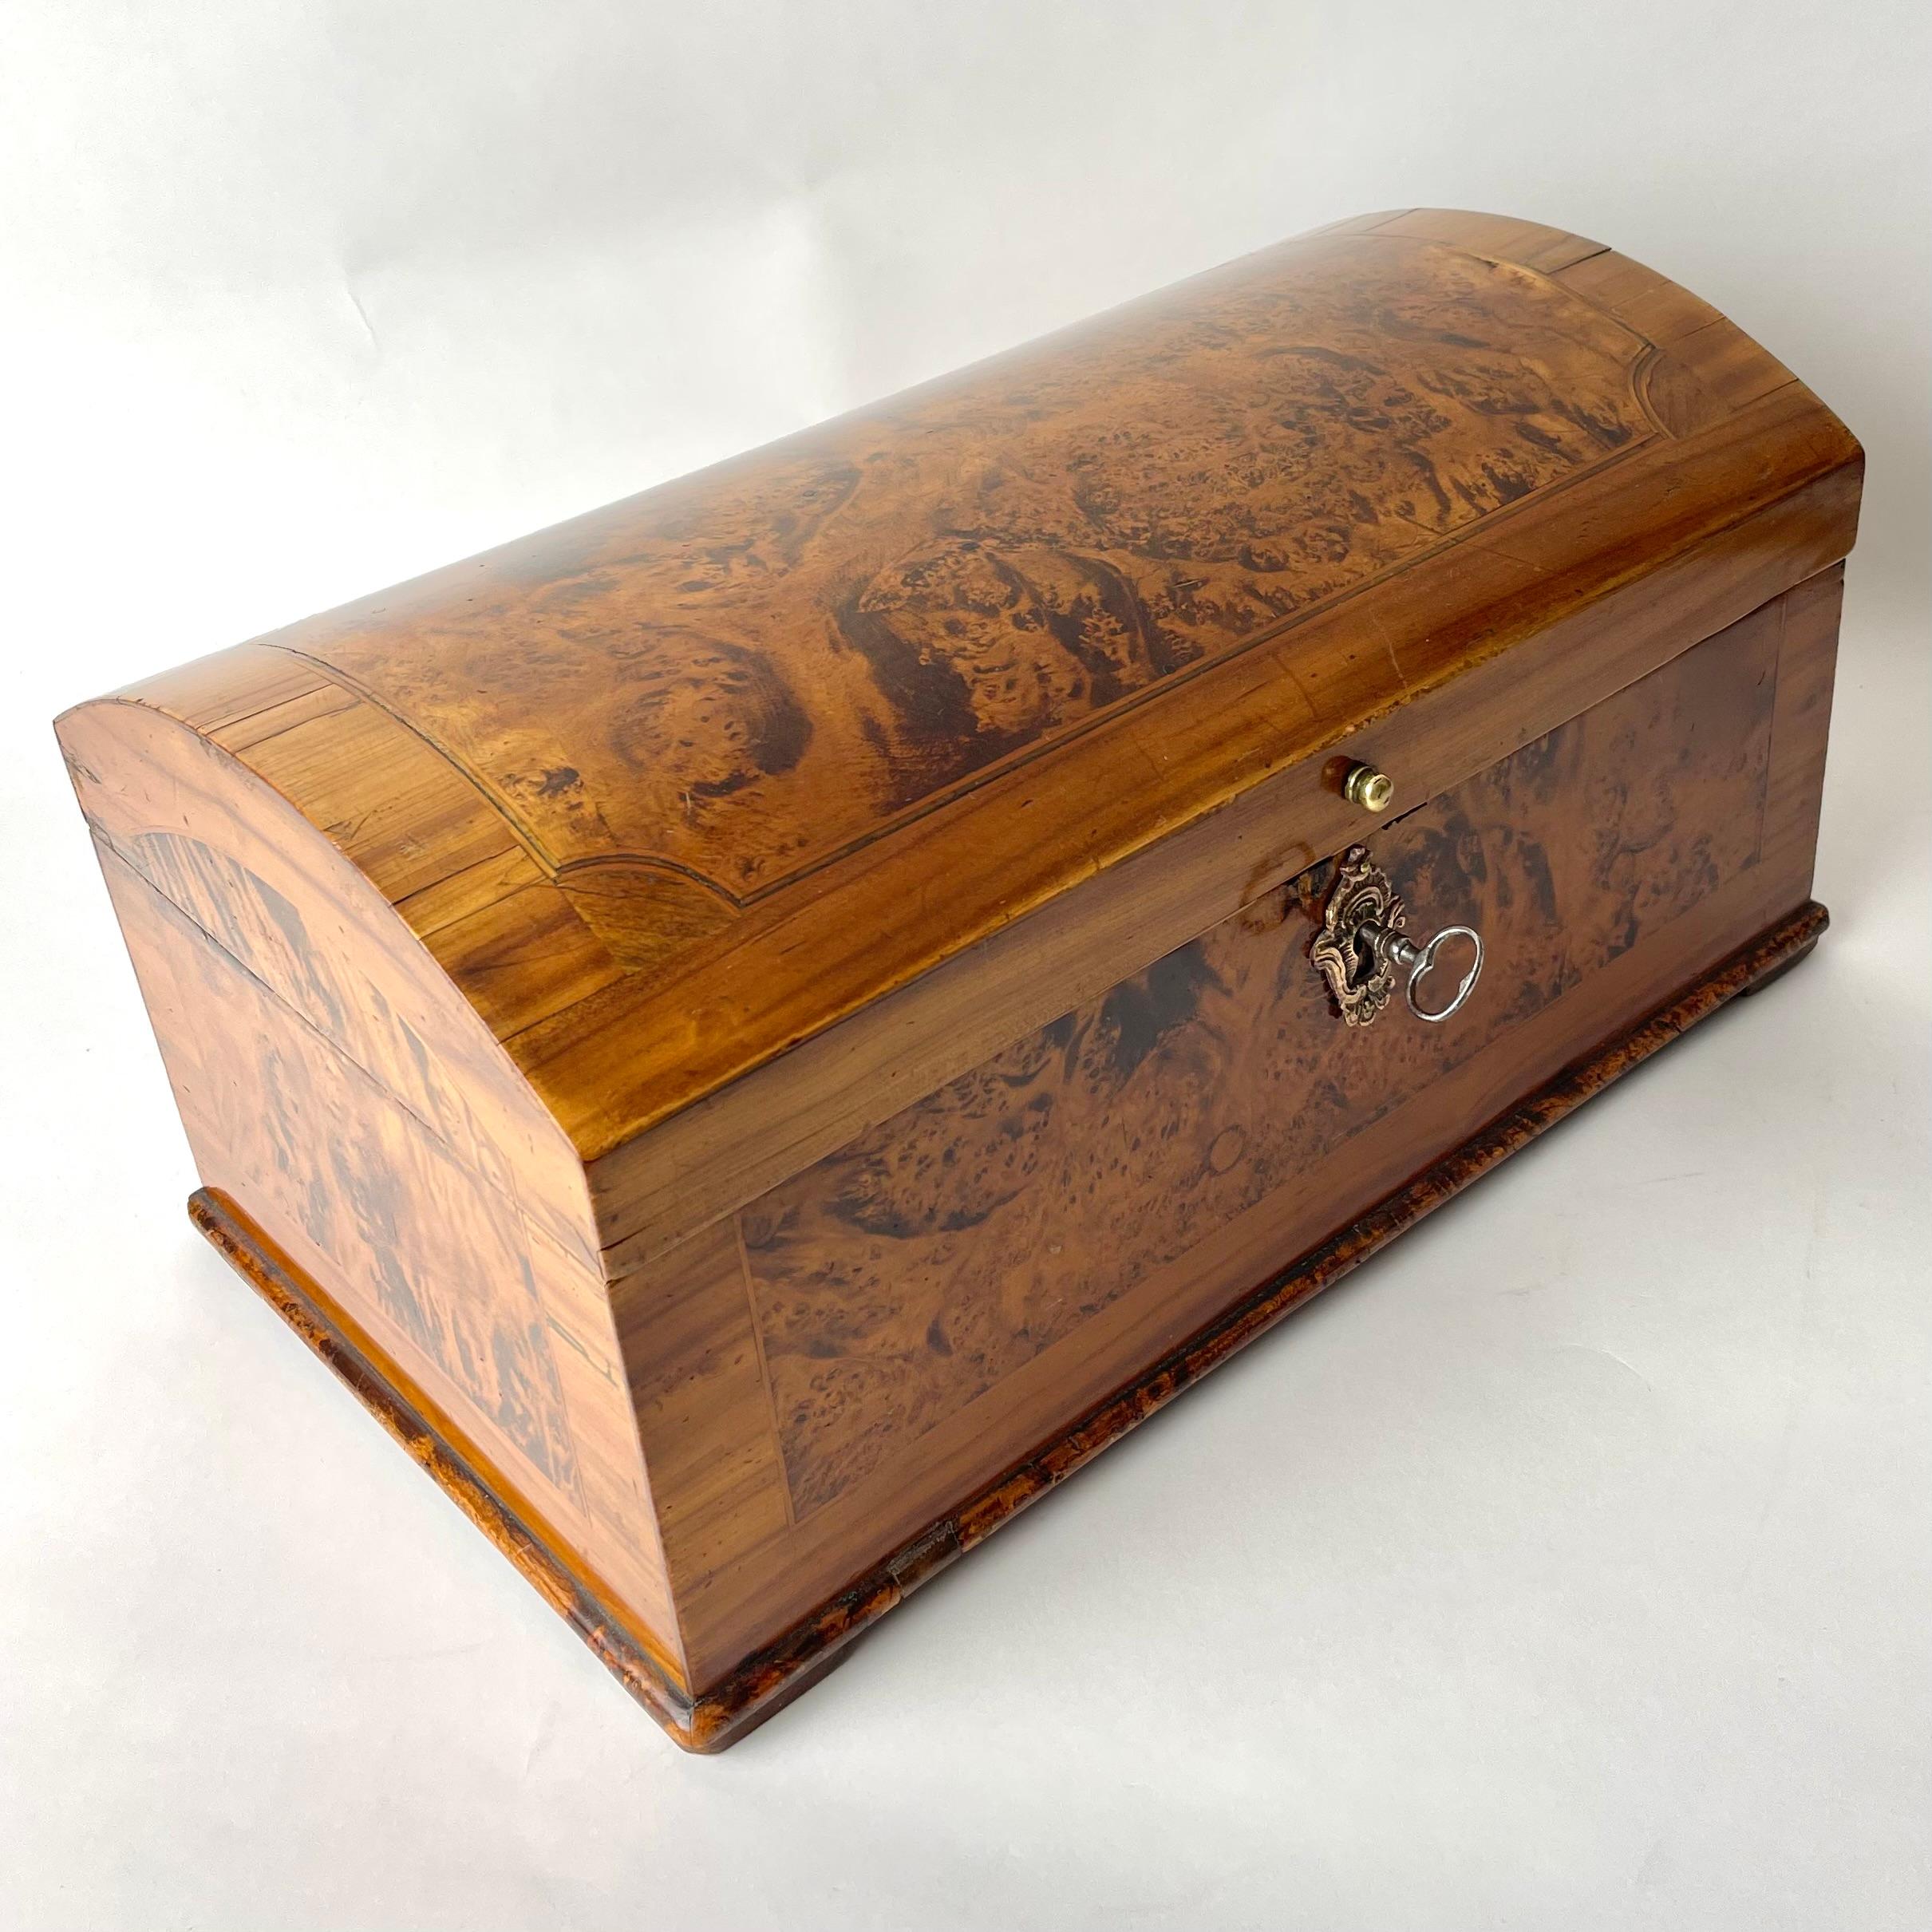 Charming small Chest in Alder Root and elm. Made in ”Mälardalen” in Sweden during Swedish Rococo in the 1760s. The inside in painted wood with a drawer on the side. Perfect for jewelry or watches.

Wear consistent with age and use 